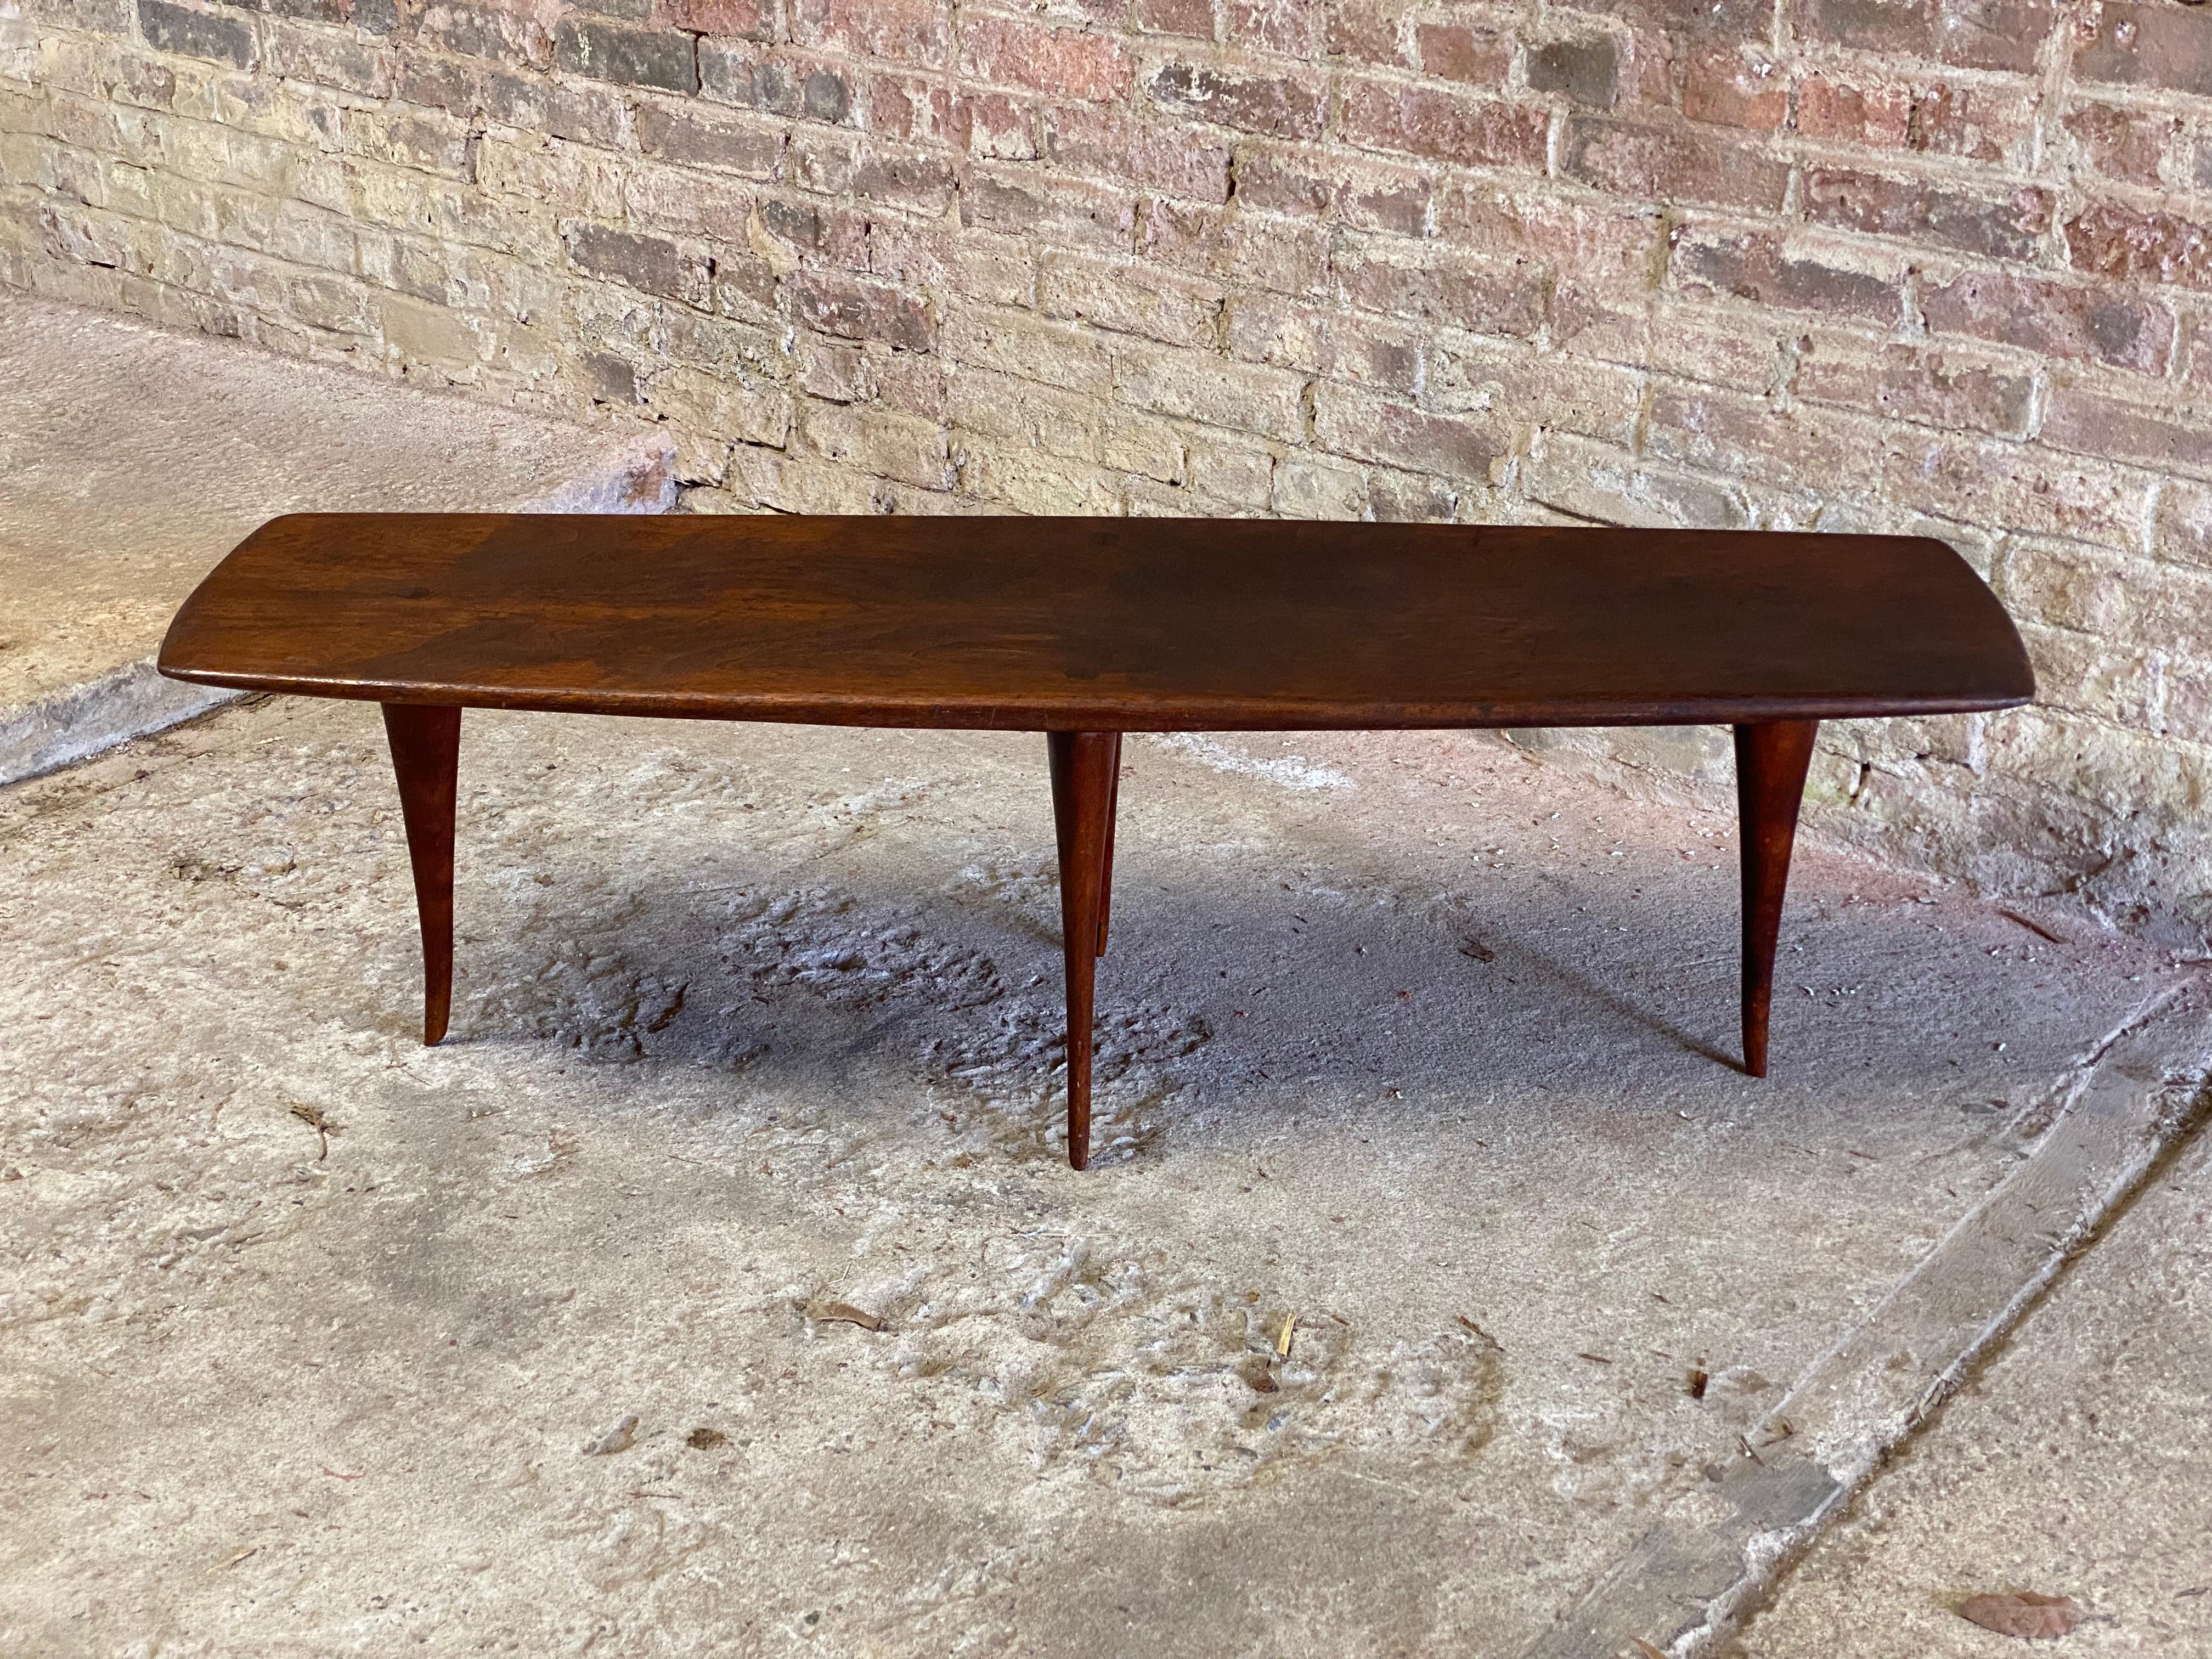 Signed and dated Dirk Rosse (1925-2014) solid black walnut American Studio Crafts movement coffee table. Featuring a solid single board walnut top, visible splined leg joinery, and sculptural tapered leg and foot. The bottom reveals his initials and